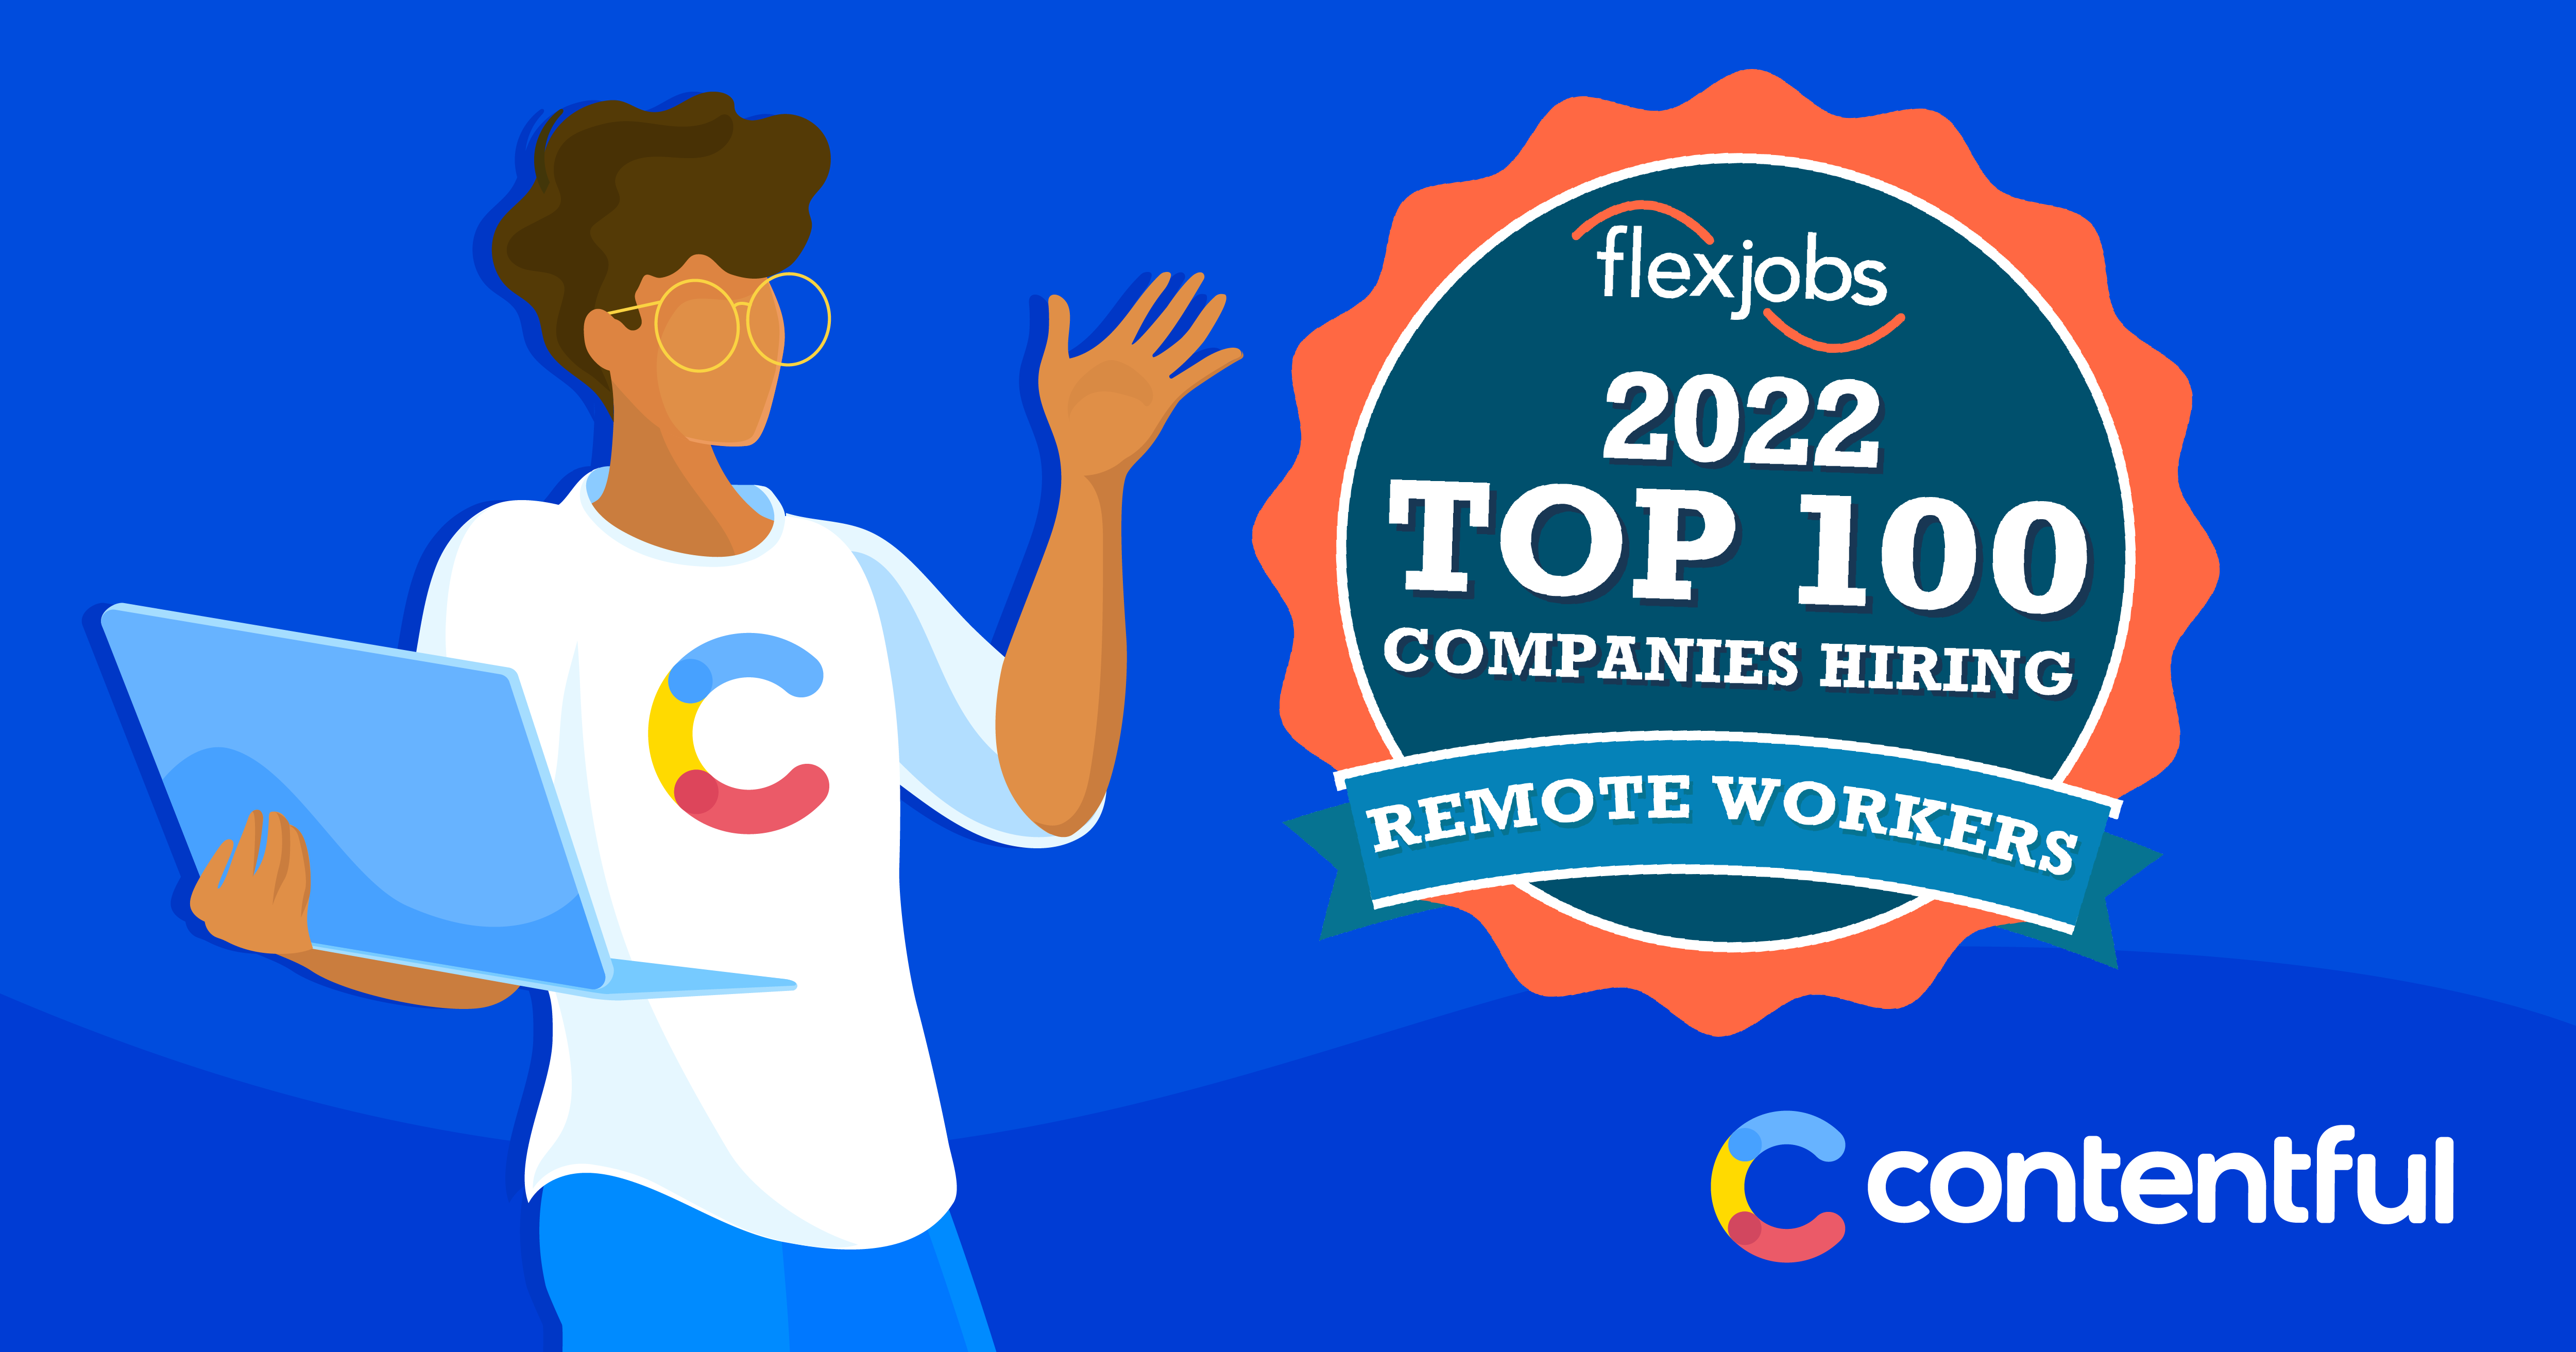 Contentful Named a Top 100 Company to Watch for Remote Jobs in 2022